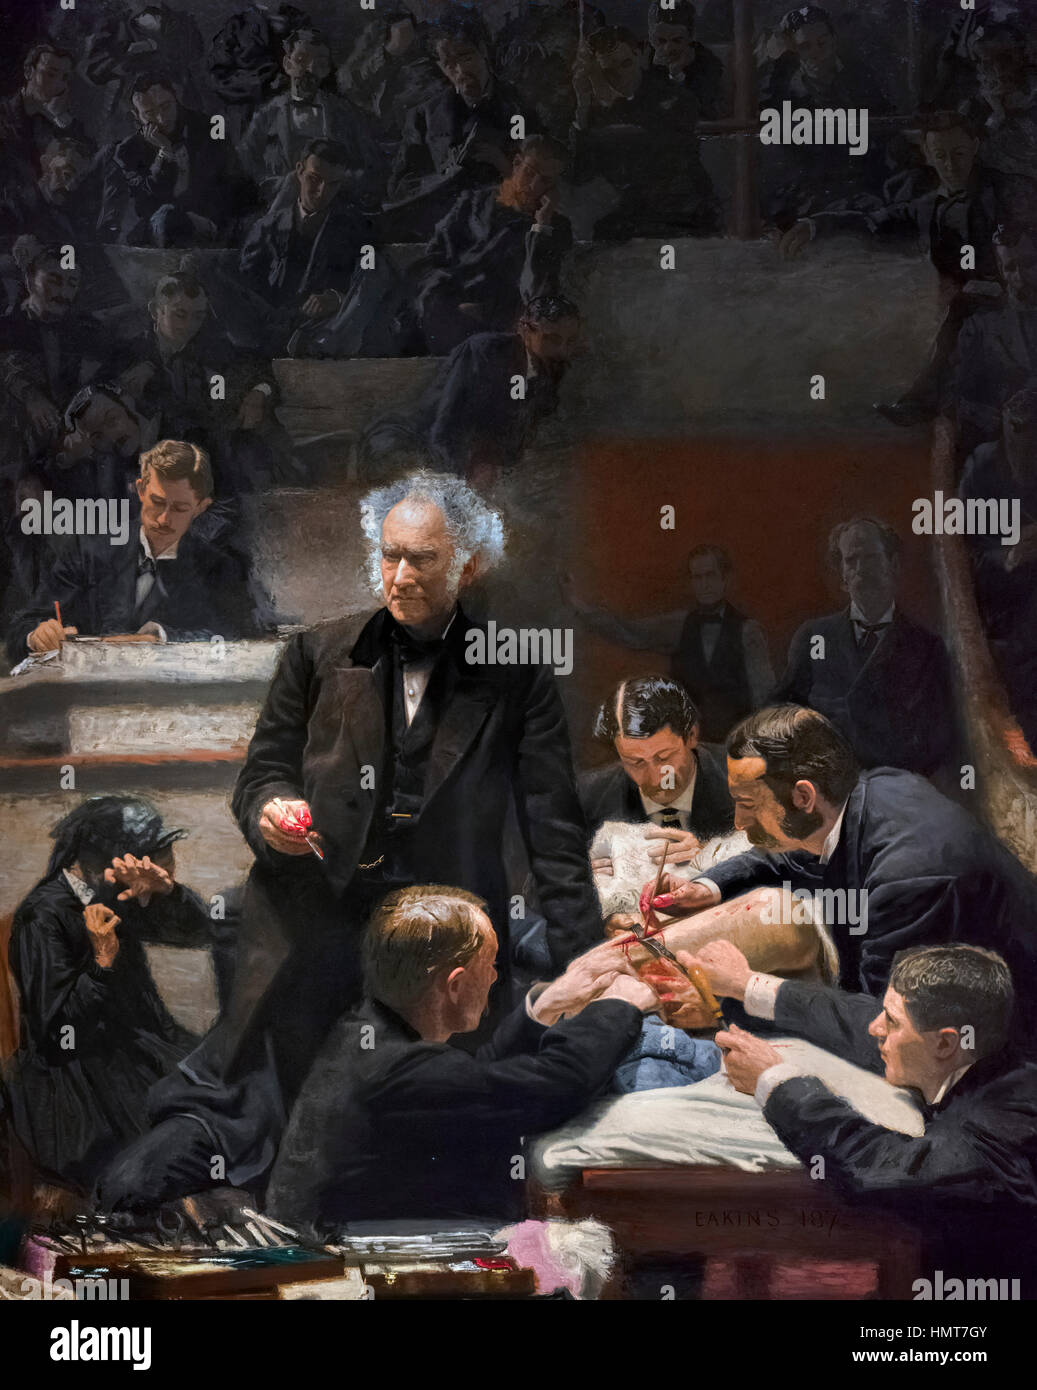 Thomas Eakins (1844-1916) 'The Gross Clinic', oil on canvas, 1875 Stock Photo